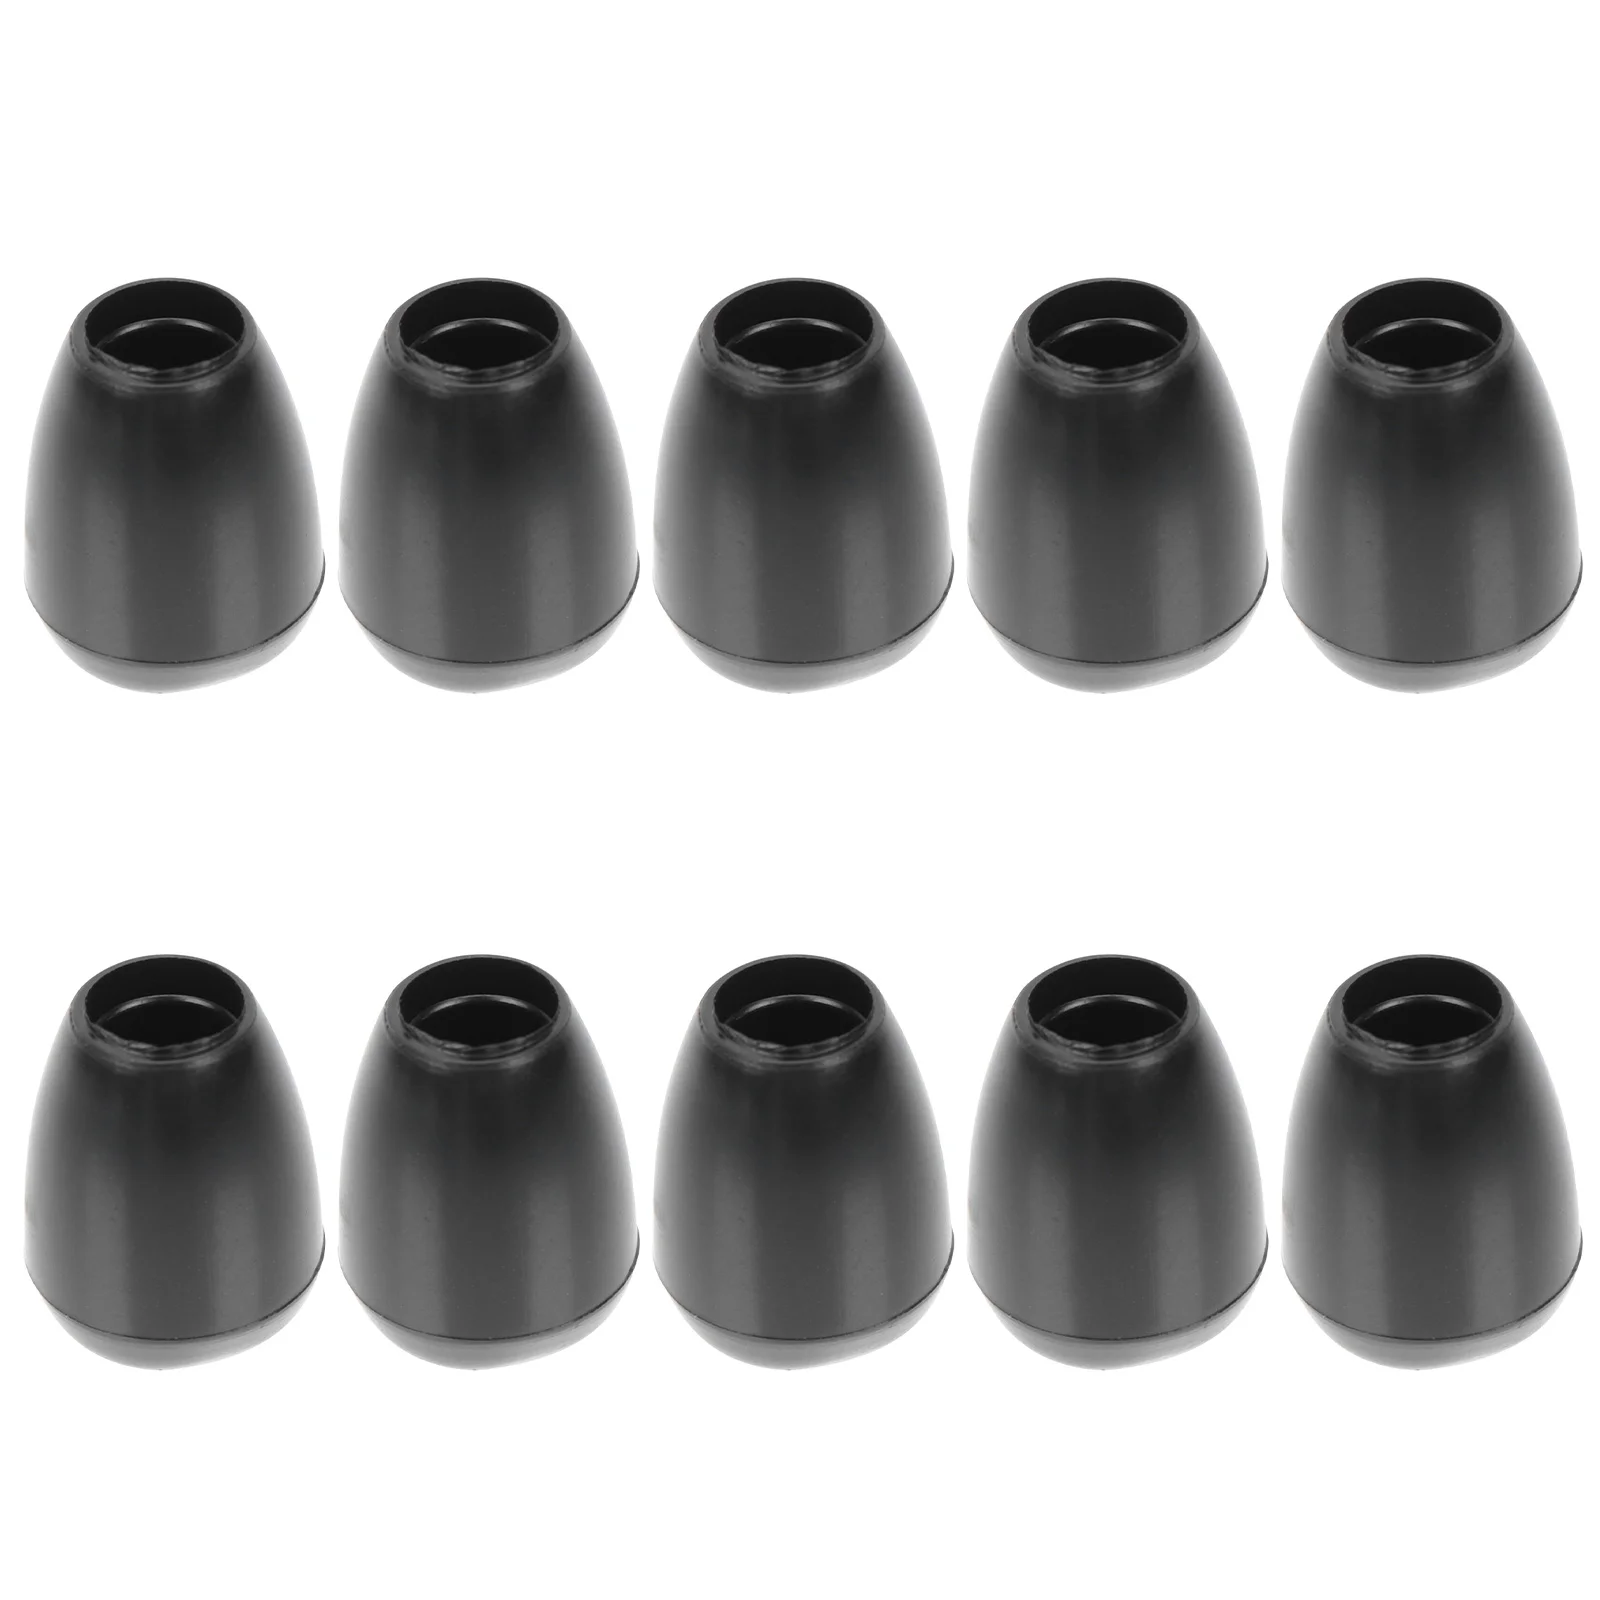 

10 Pairs Stethoscope Earplugs Silicone Earbud Stethoscopes Soft Seal Tips Silica Gel Echoscope Replacement Accessories